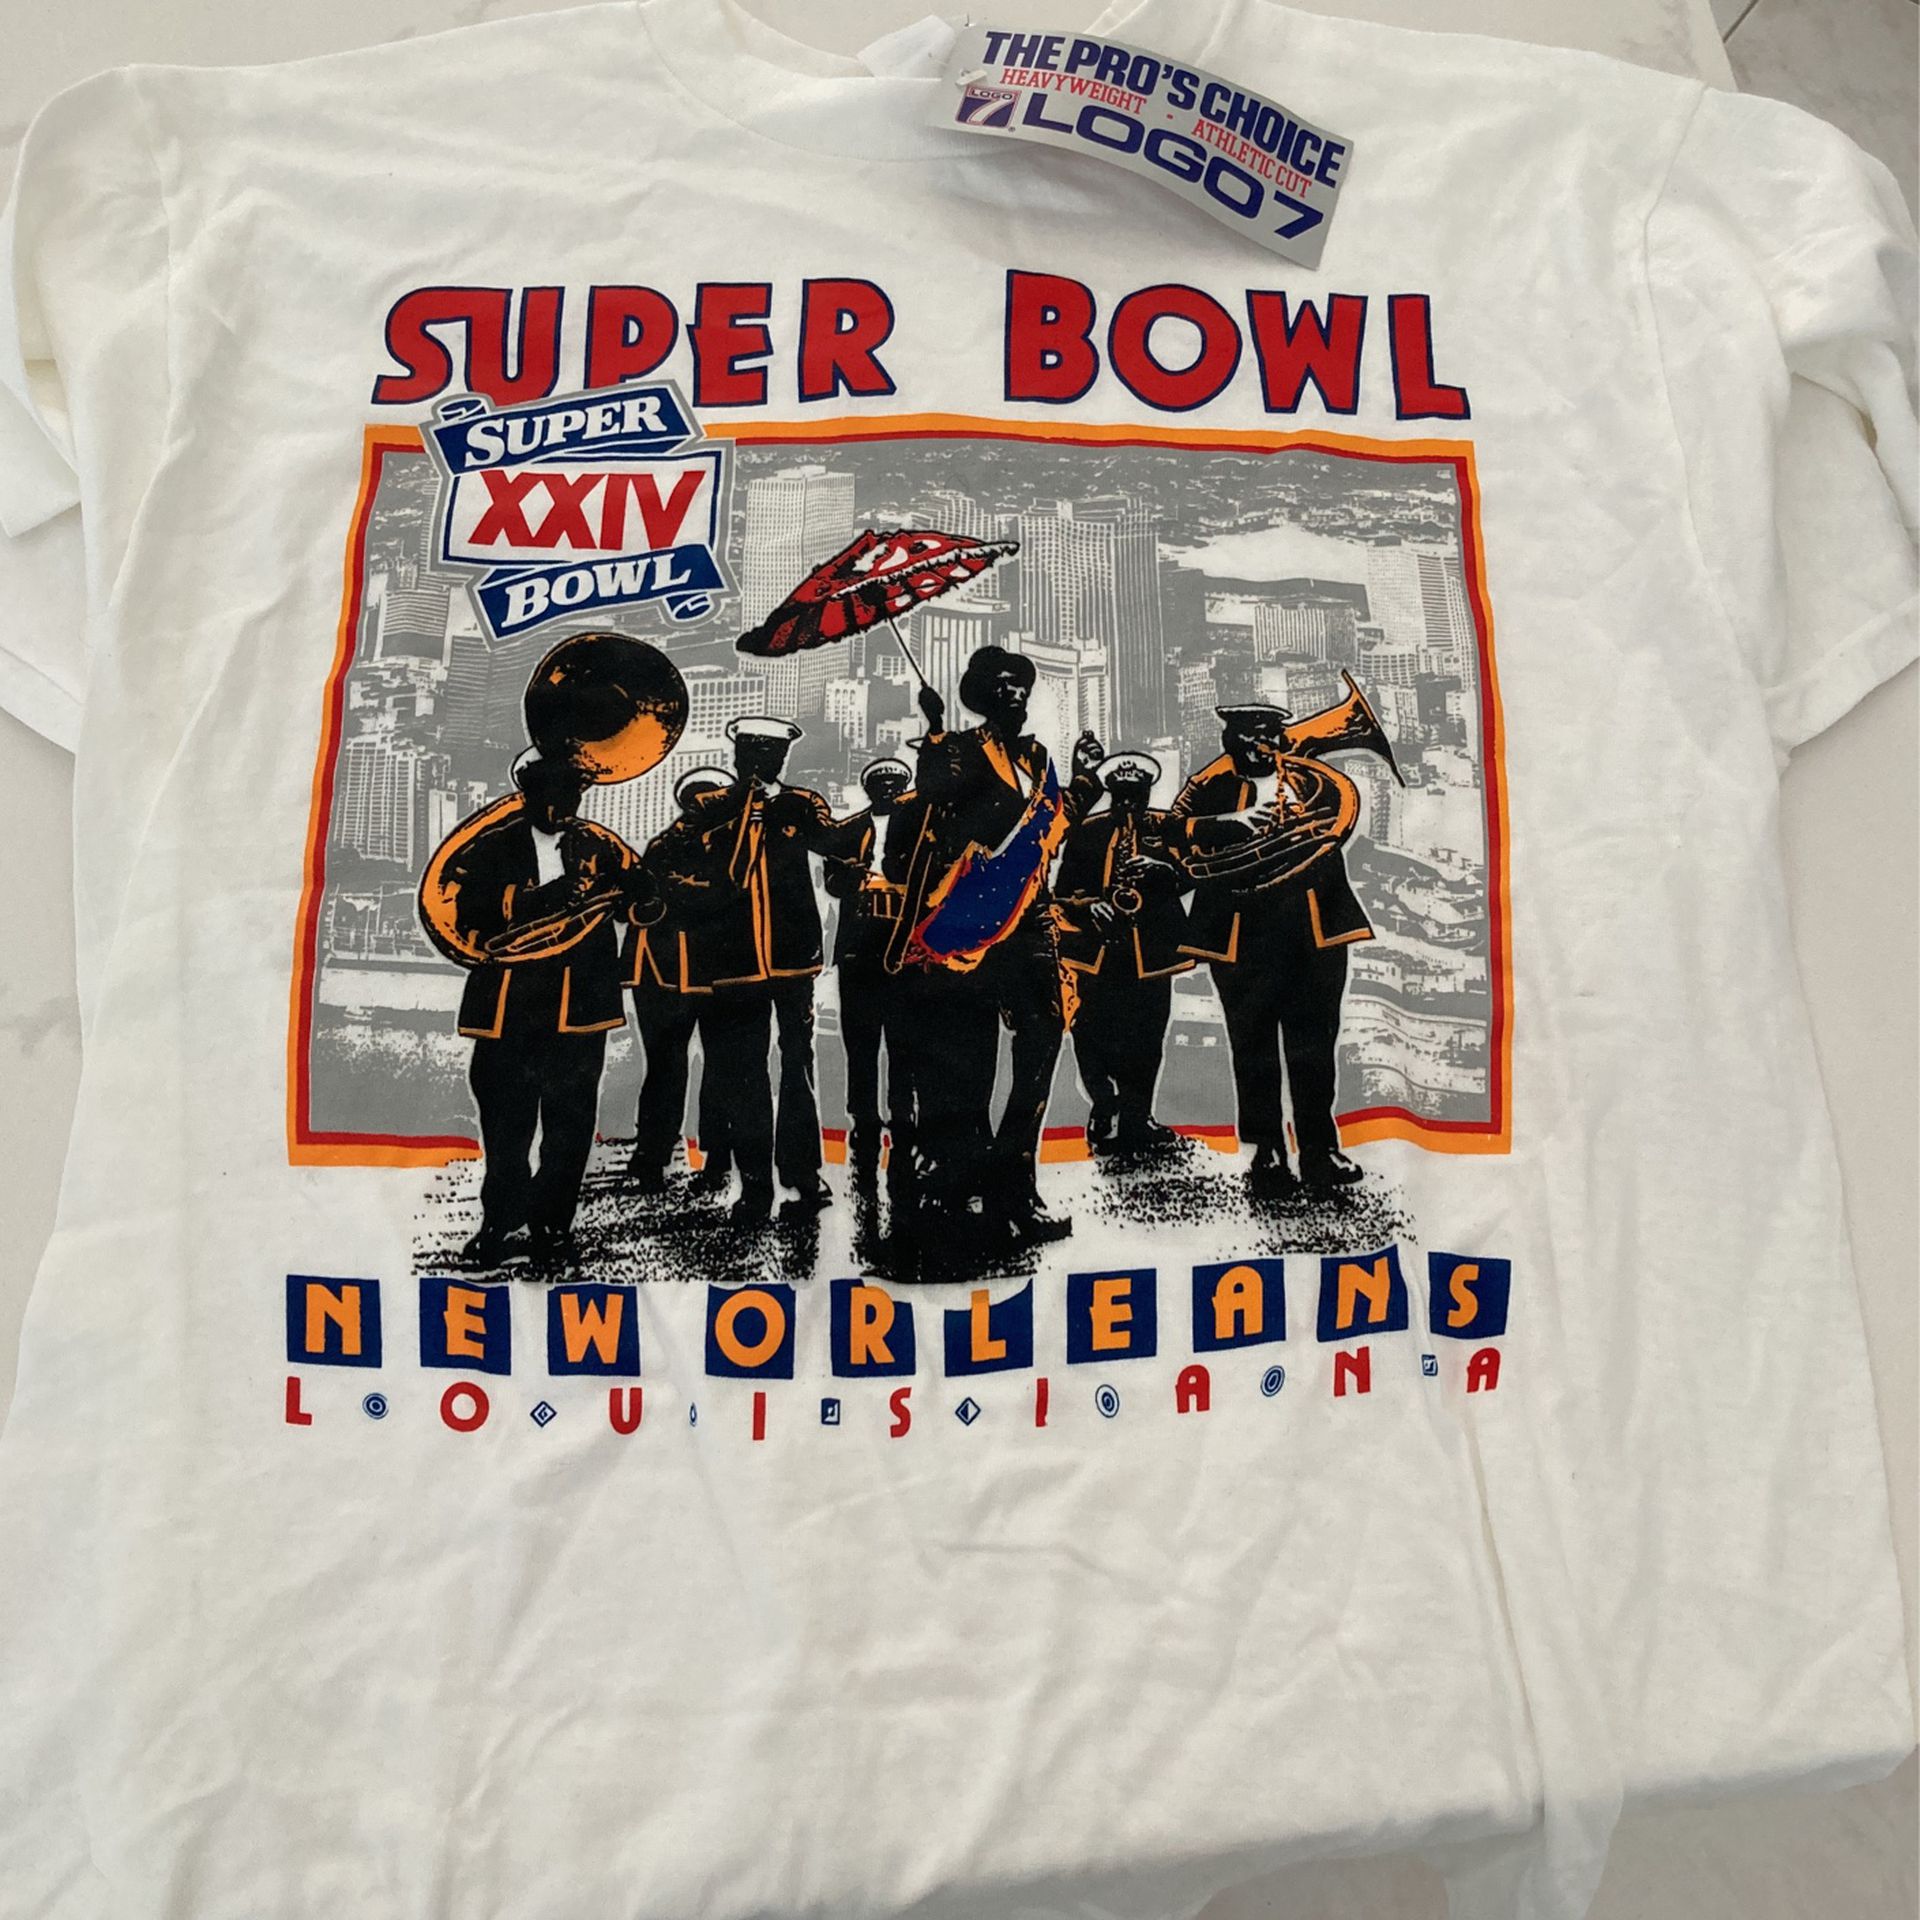 NFL Football NEW Collectible Sports Shirt.  New Orleans Super Bowl XIV BOWL Tee.  Size Large. Tag Still On!